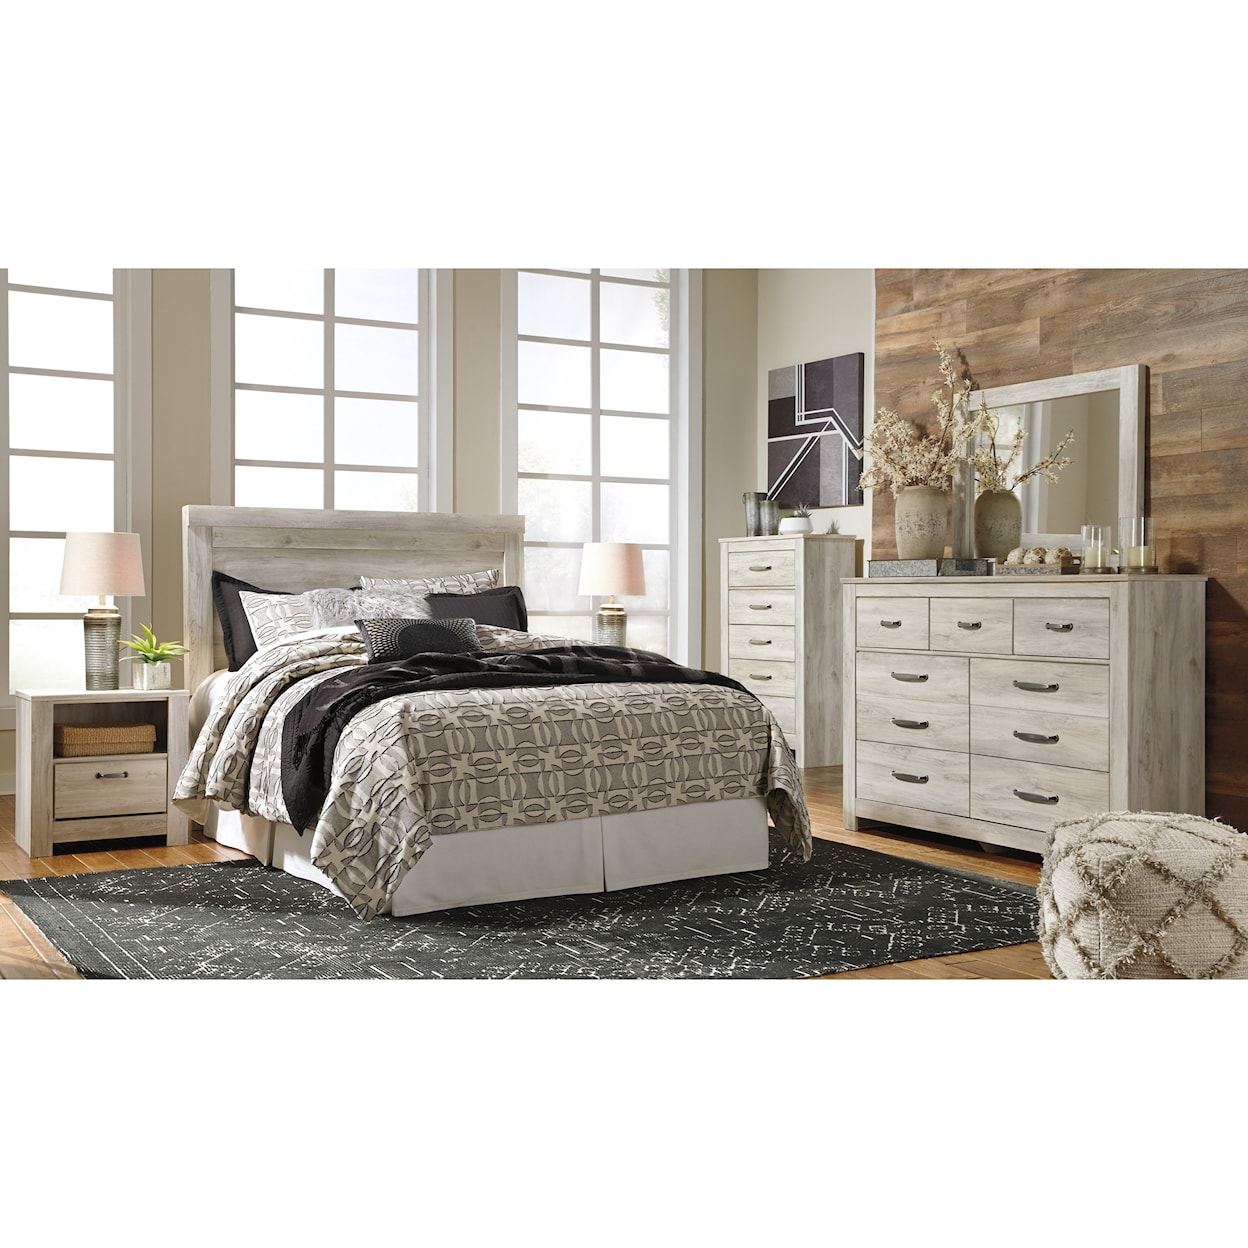 Signature Design by Ashley Furniture Bellaby Queen Bedroom Group